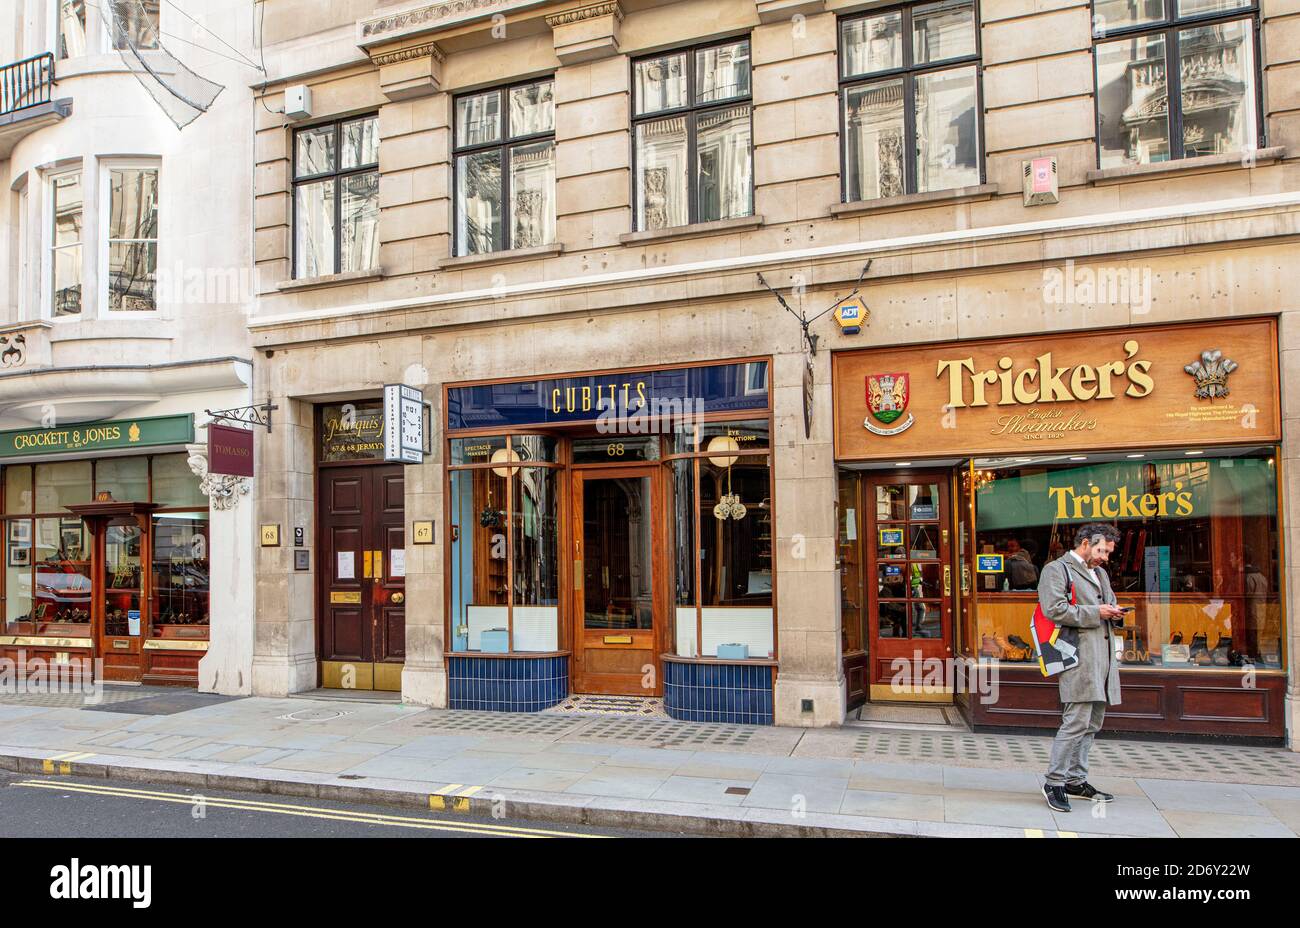 Shops along Jermyn St, London; a celebrated street specialising in tailoring, shirts and shoes for gentlemen and upmarket restaurants. Stock Photo